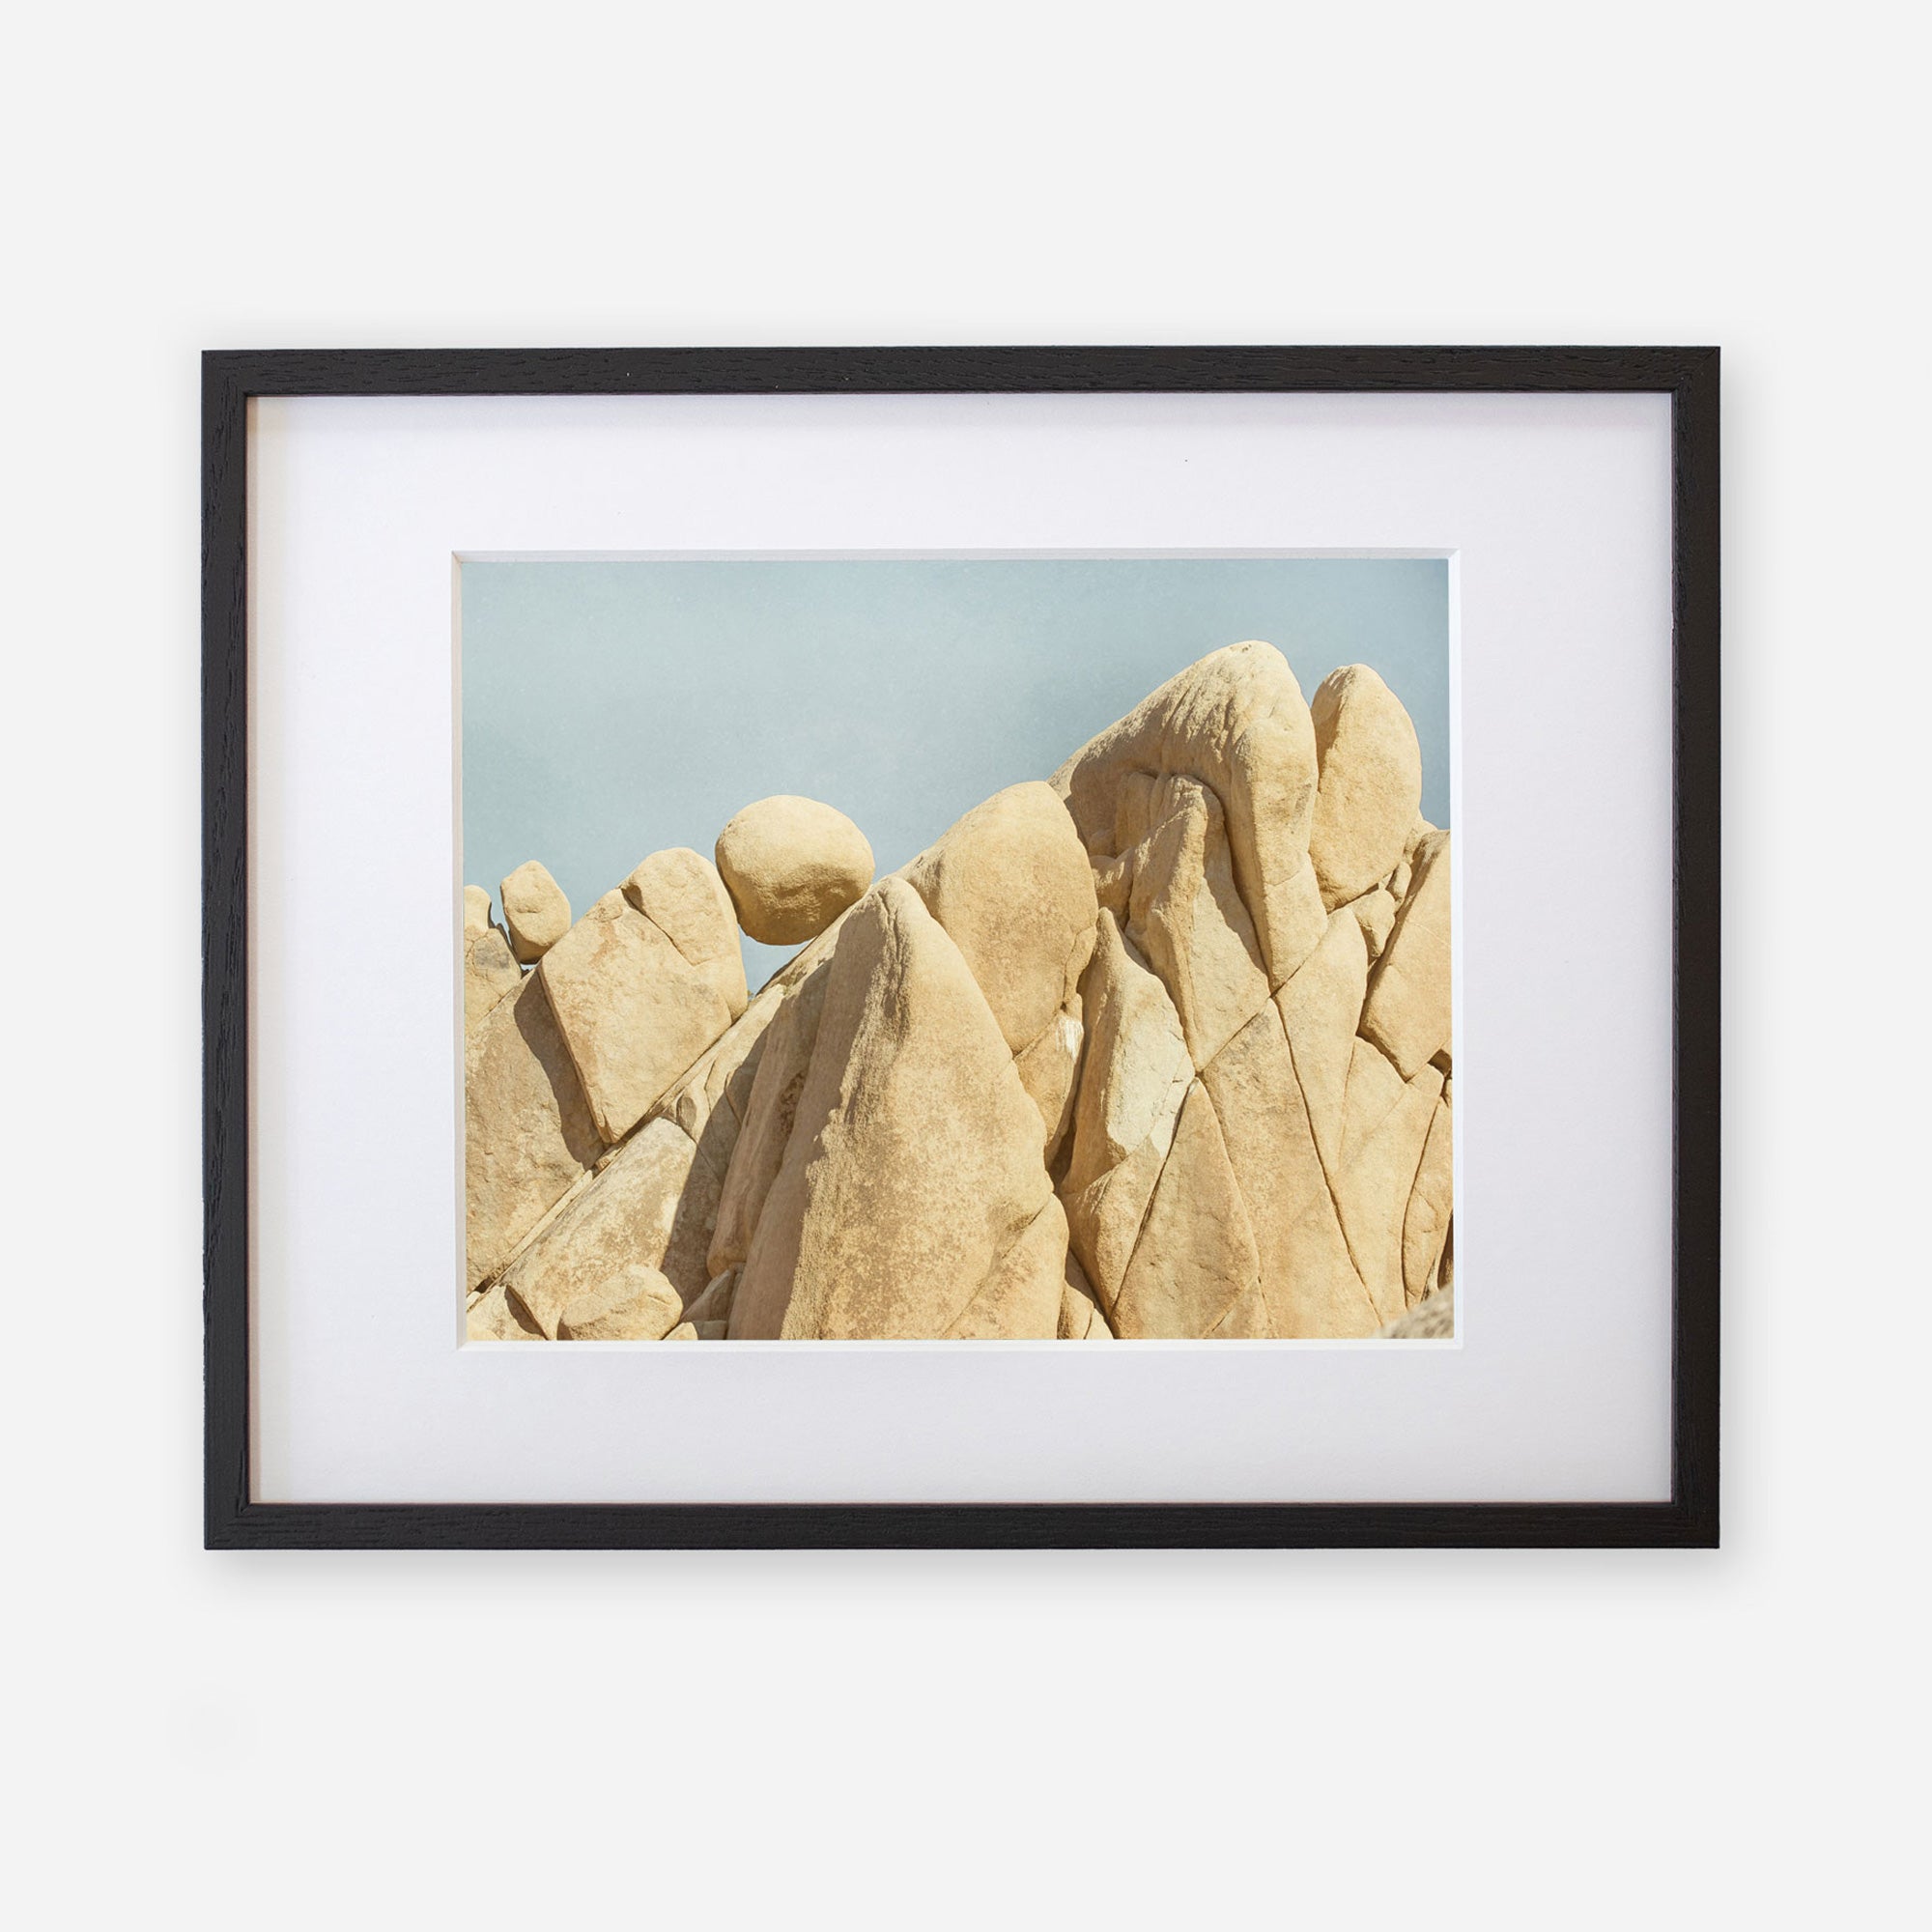 Unframed Joshua Tree print of &#39;Rock Formations&#39; featuring large, weathered sandstone rocks against a clear blue sky by Offley Green.